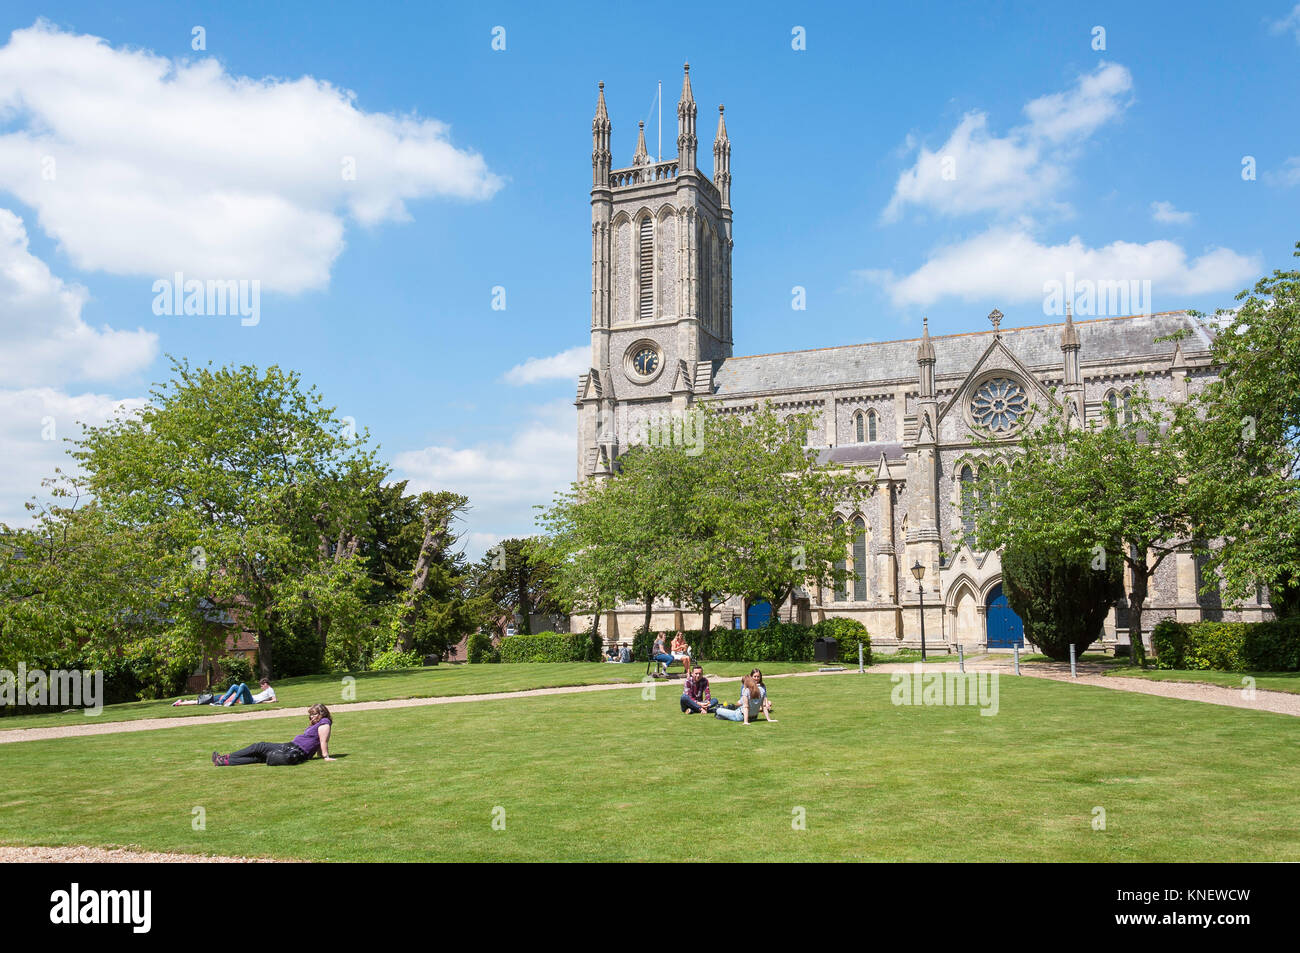 St Mary's Church, Eglise Fermer, Andover, Hampshire, Angleterre, Royaume-Uni Banque D'Images